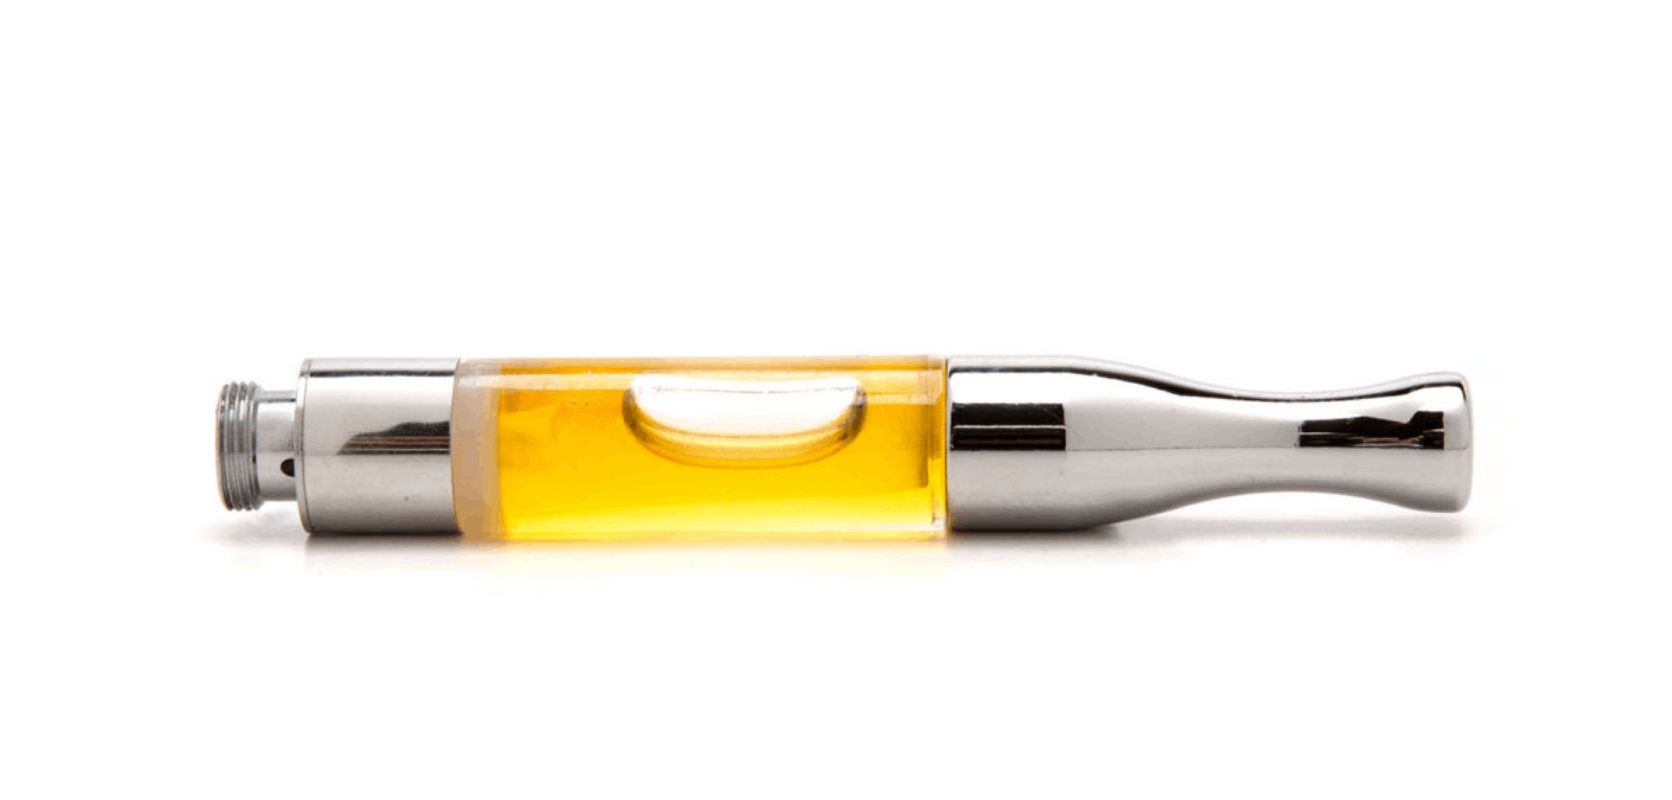 Cannabis cartridges are glass vials filled with cannabis oil. These cartridges typically have a mouthpiece and are attached to vaping devices. 